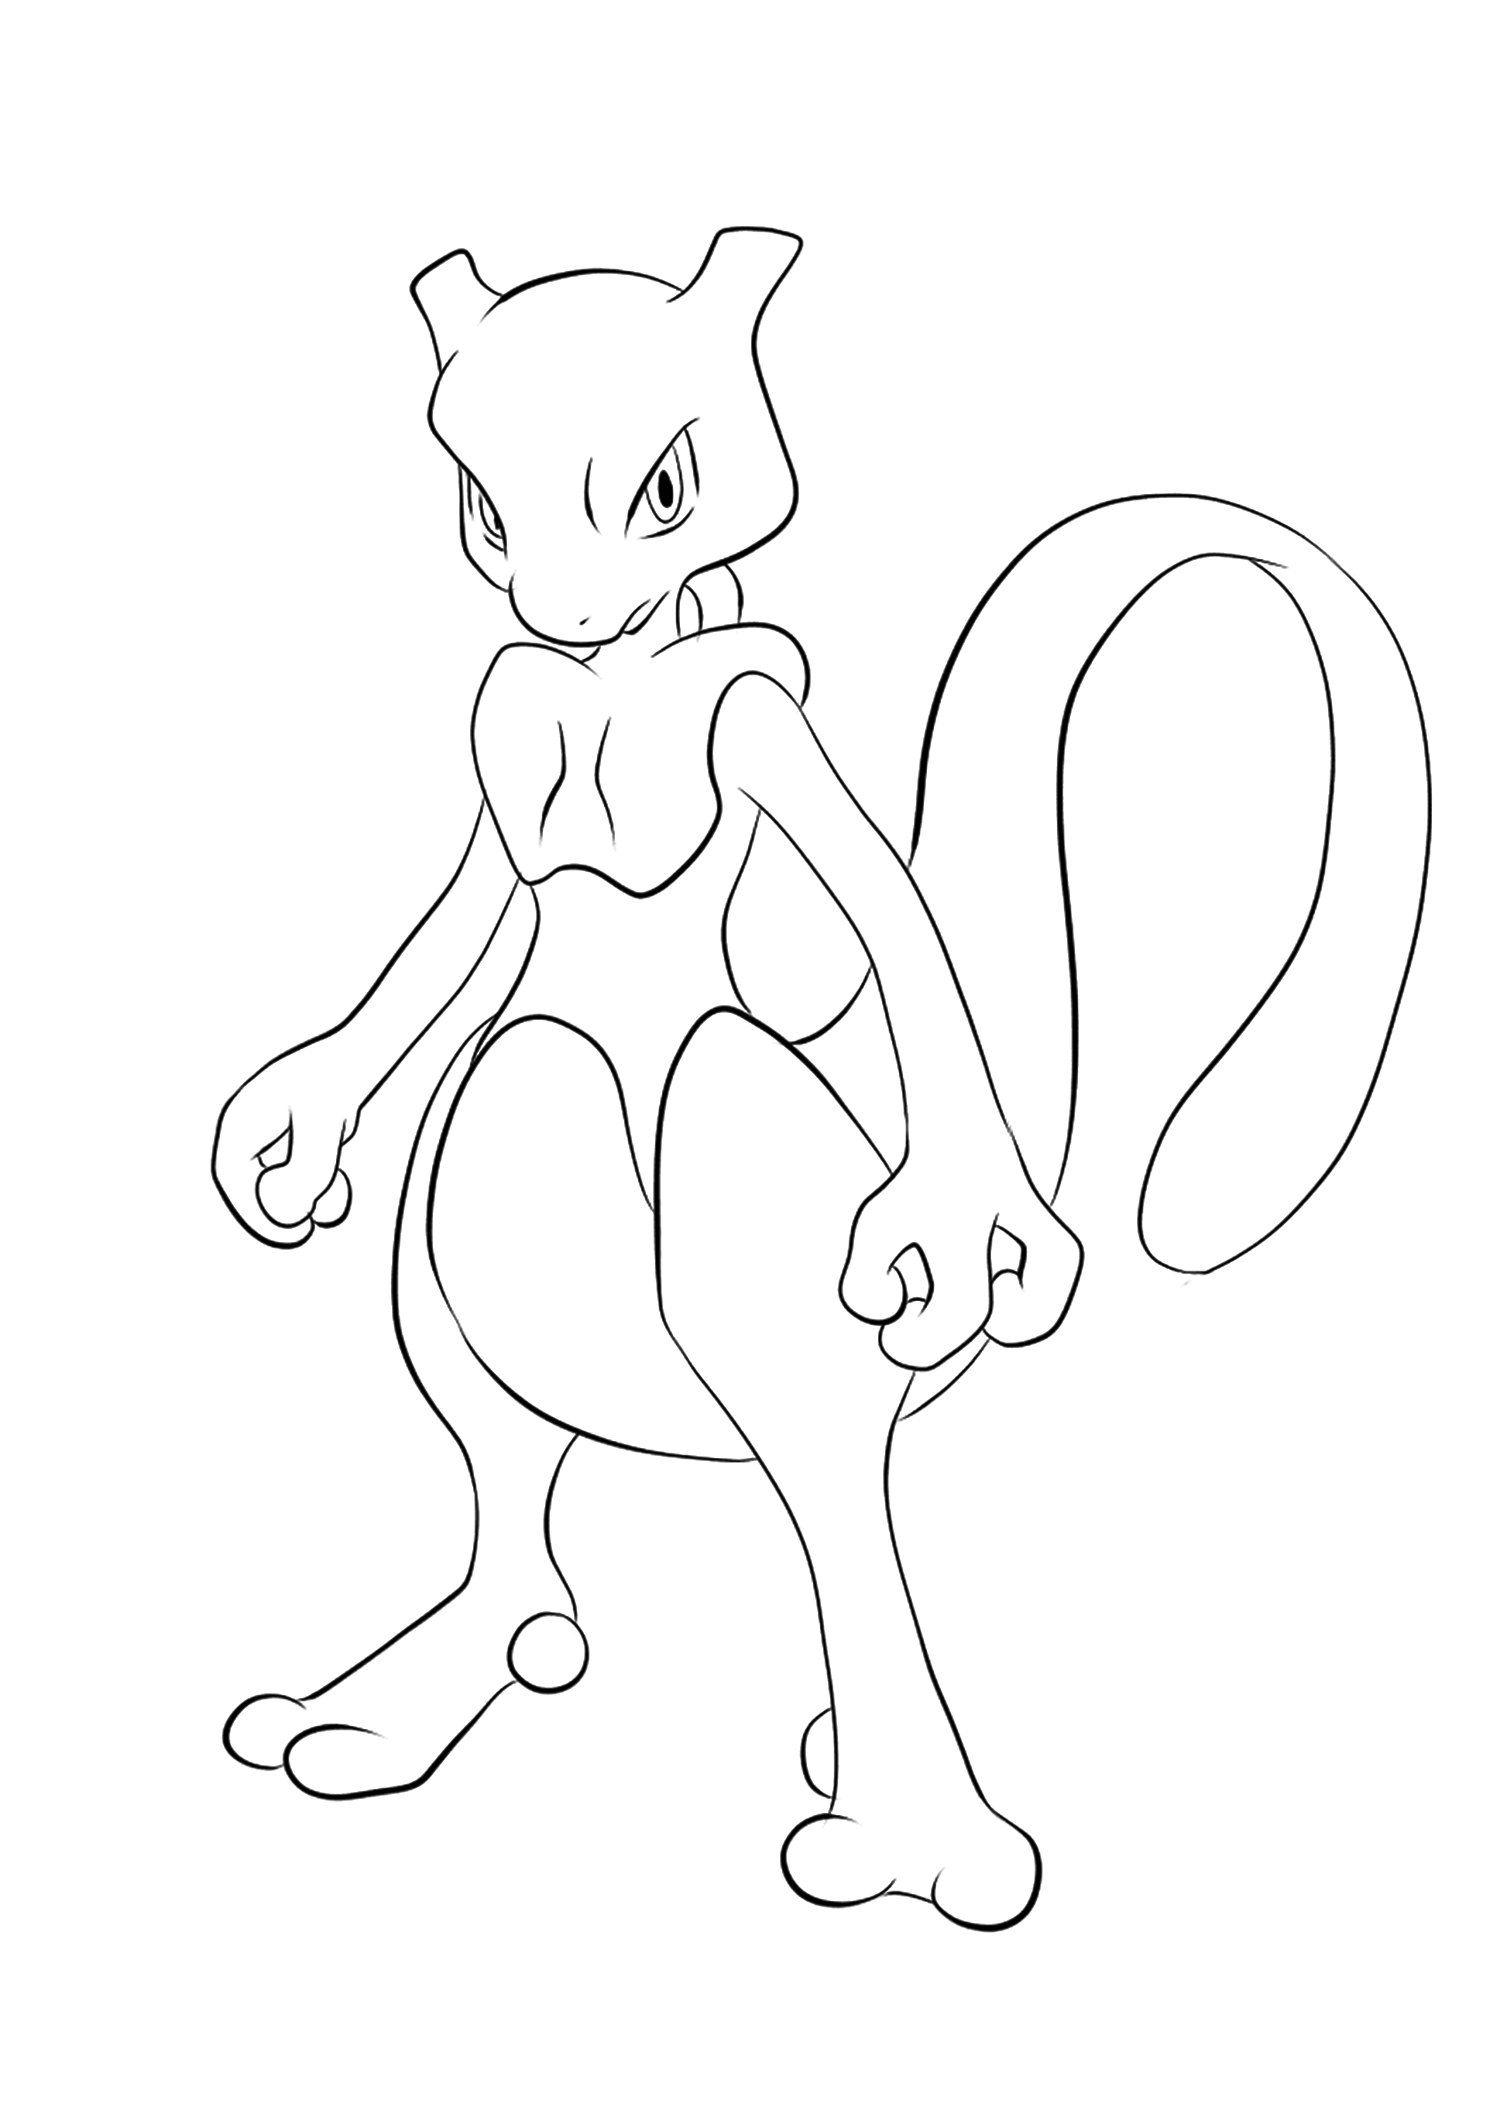 Mewtwo (No.150)Mewtwo Coloring page, Generation I Pokemon of type PsychicOriginal image credit: Pokemon linearts by Lilly Gerbil on Deviantart.Permission:  All rights reserved © Pokemon company and Ken Sugimori.